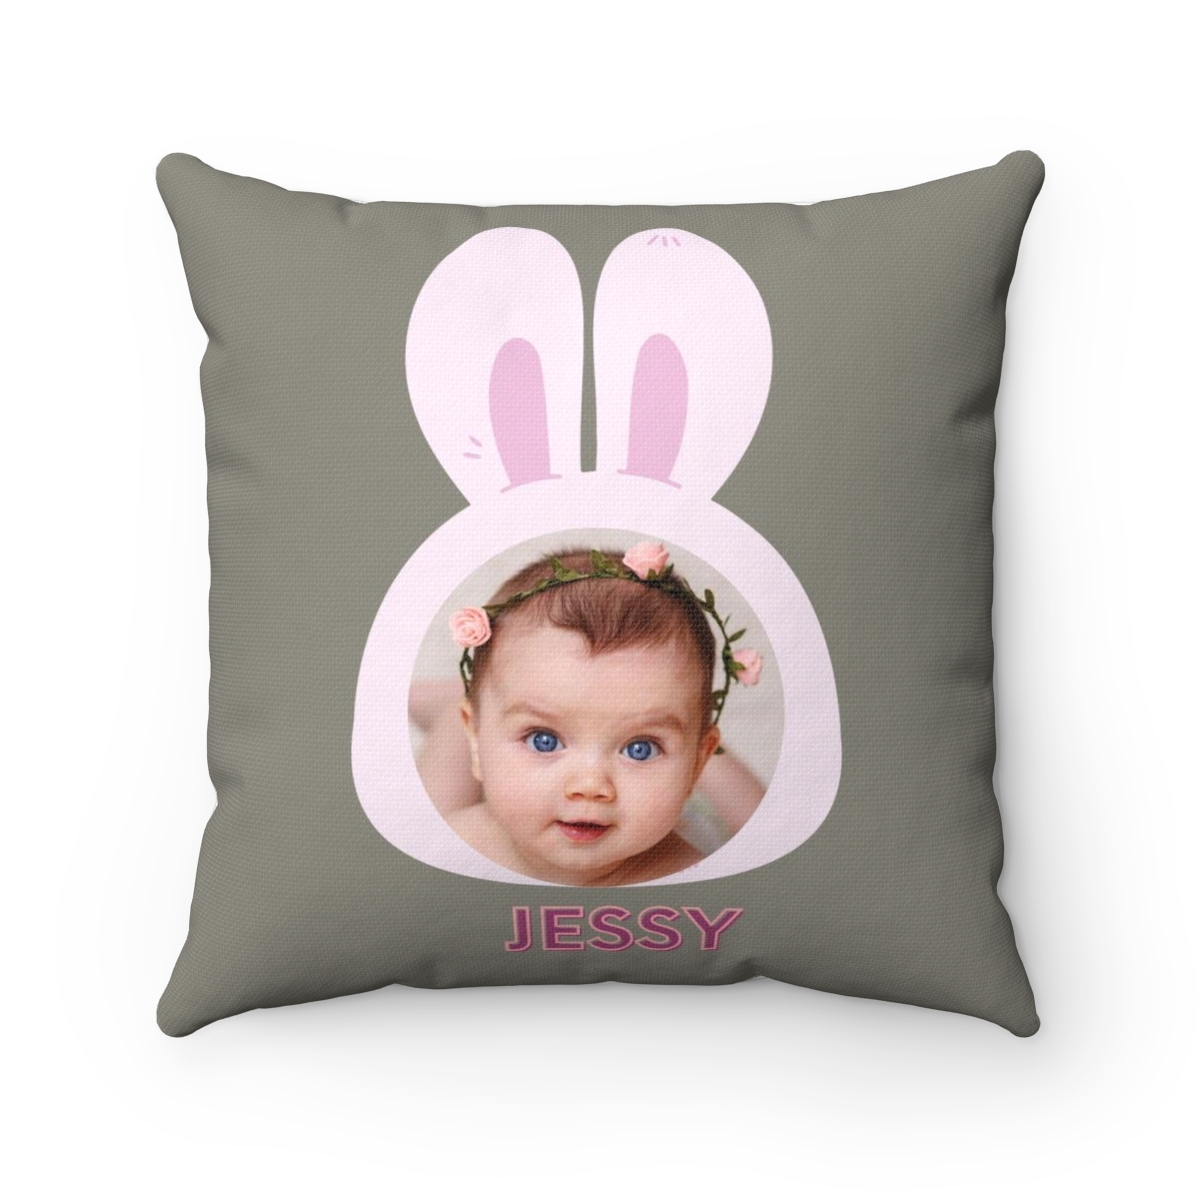 Gift a unique custom designed pillow for your baby or kids